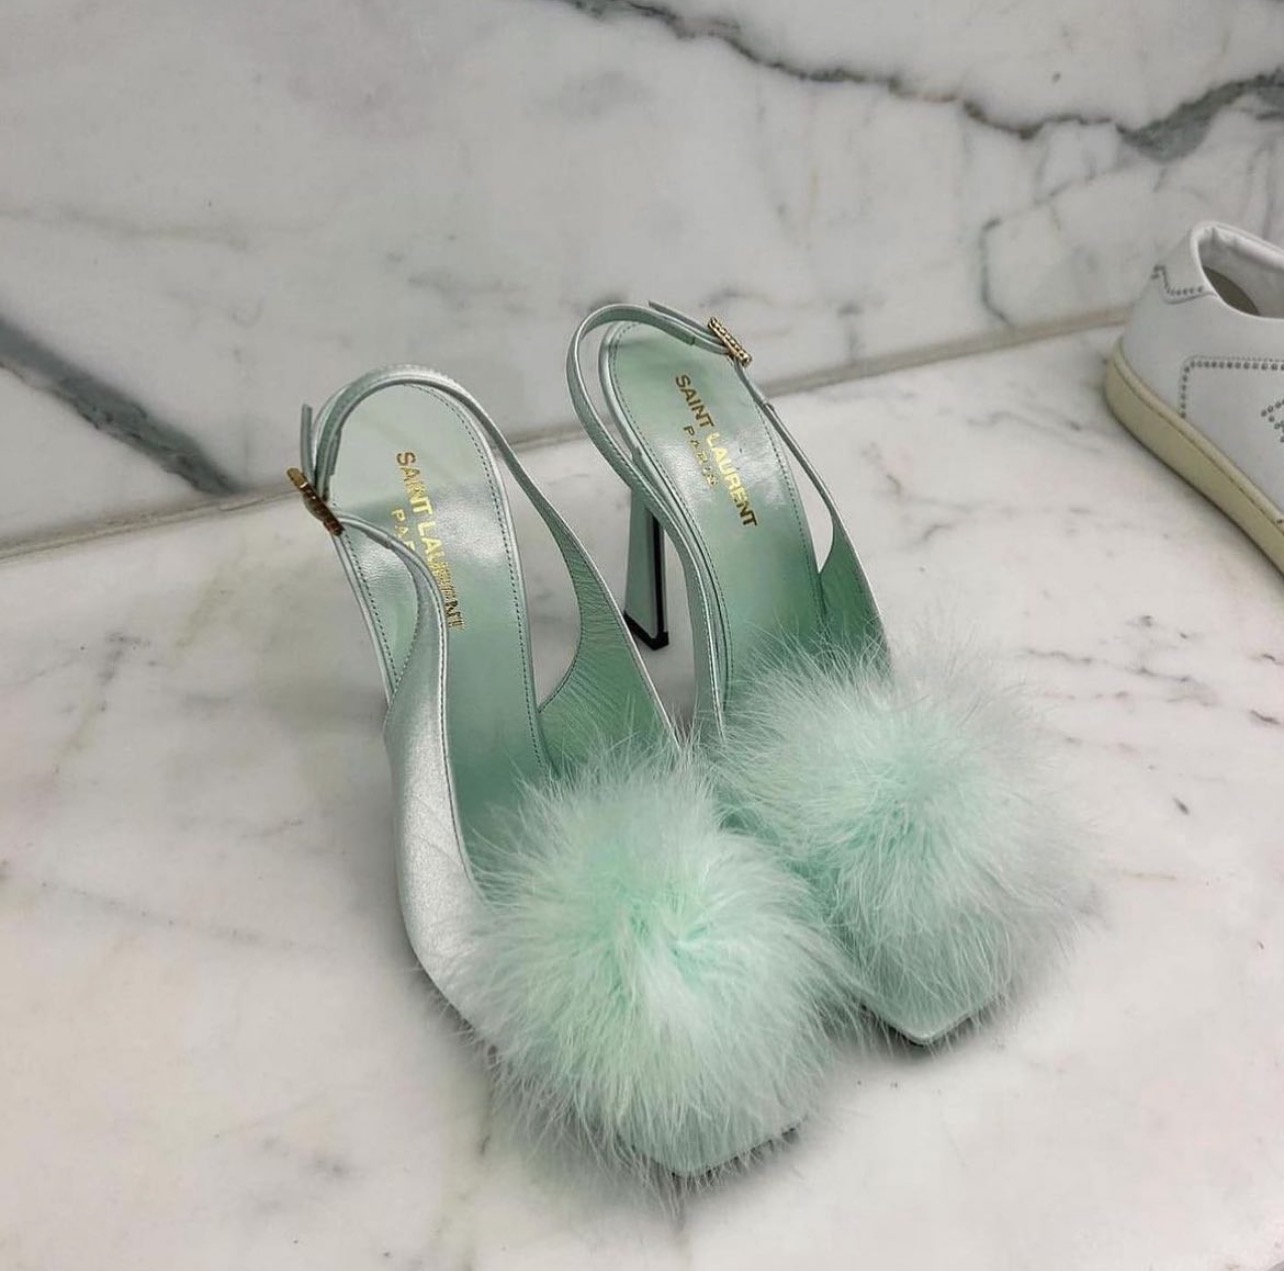 YSL Has The Perfect Mint Green Tone Heels For Your Summer Must-Have Shoe Collection